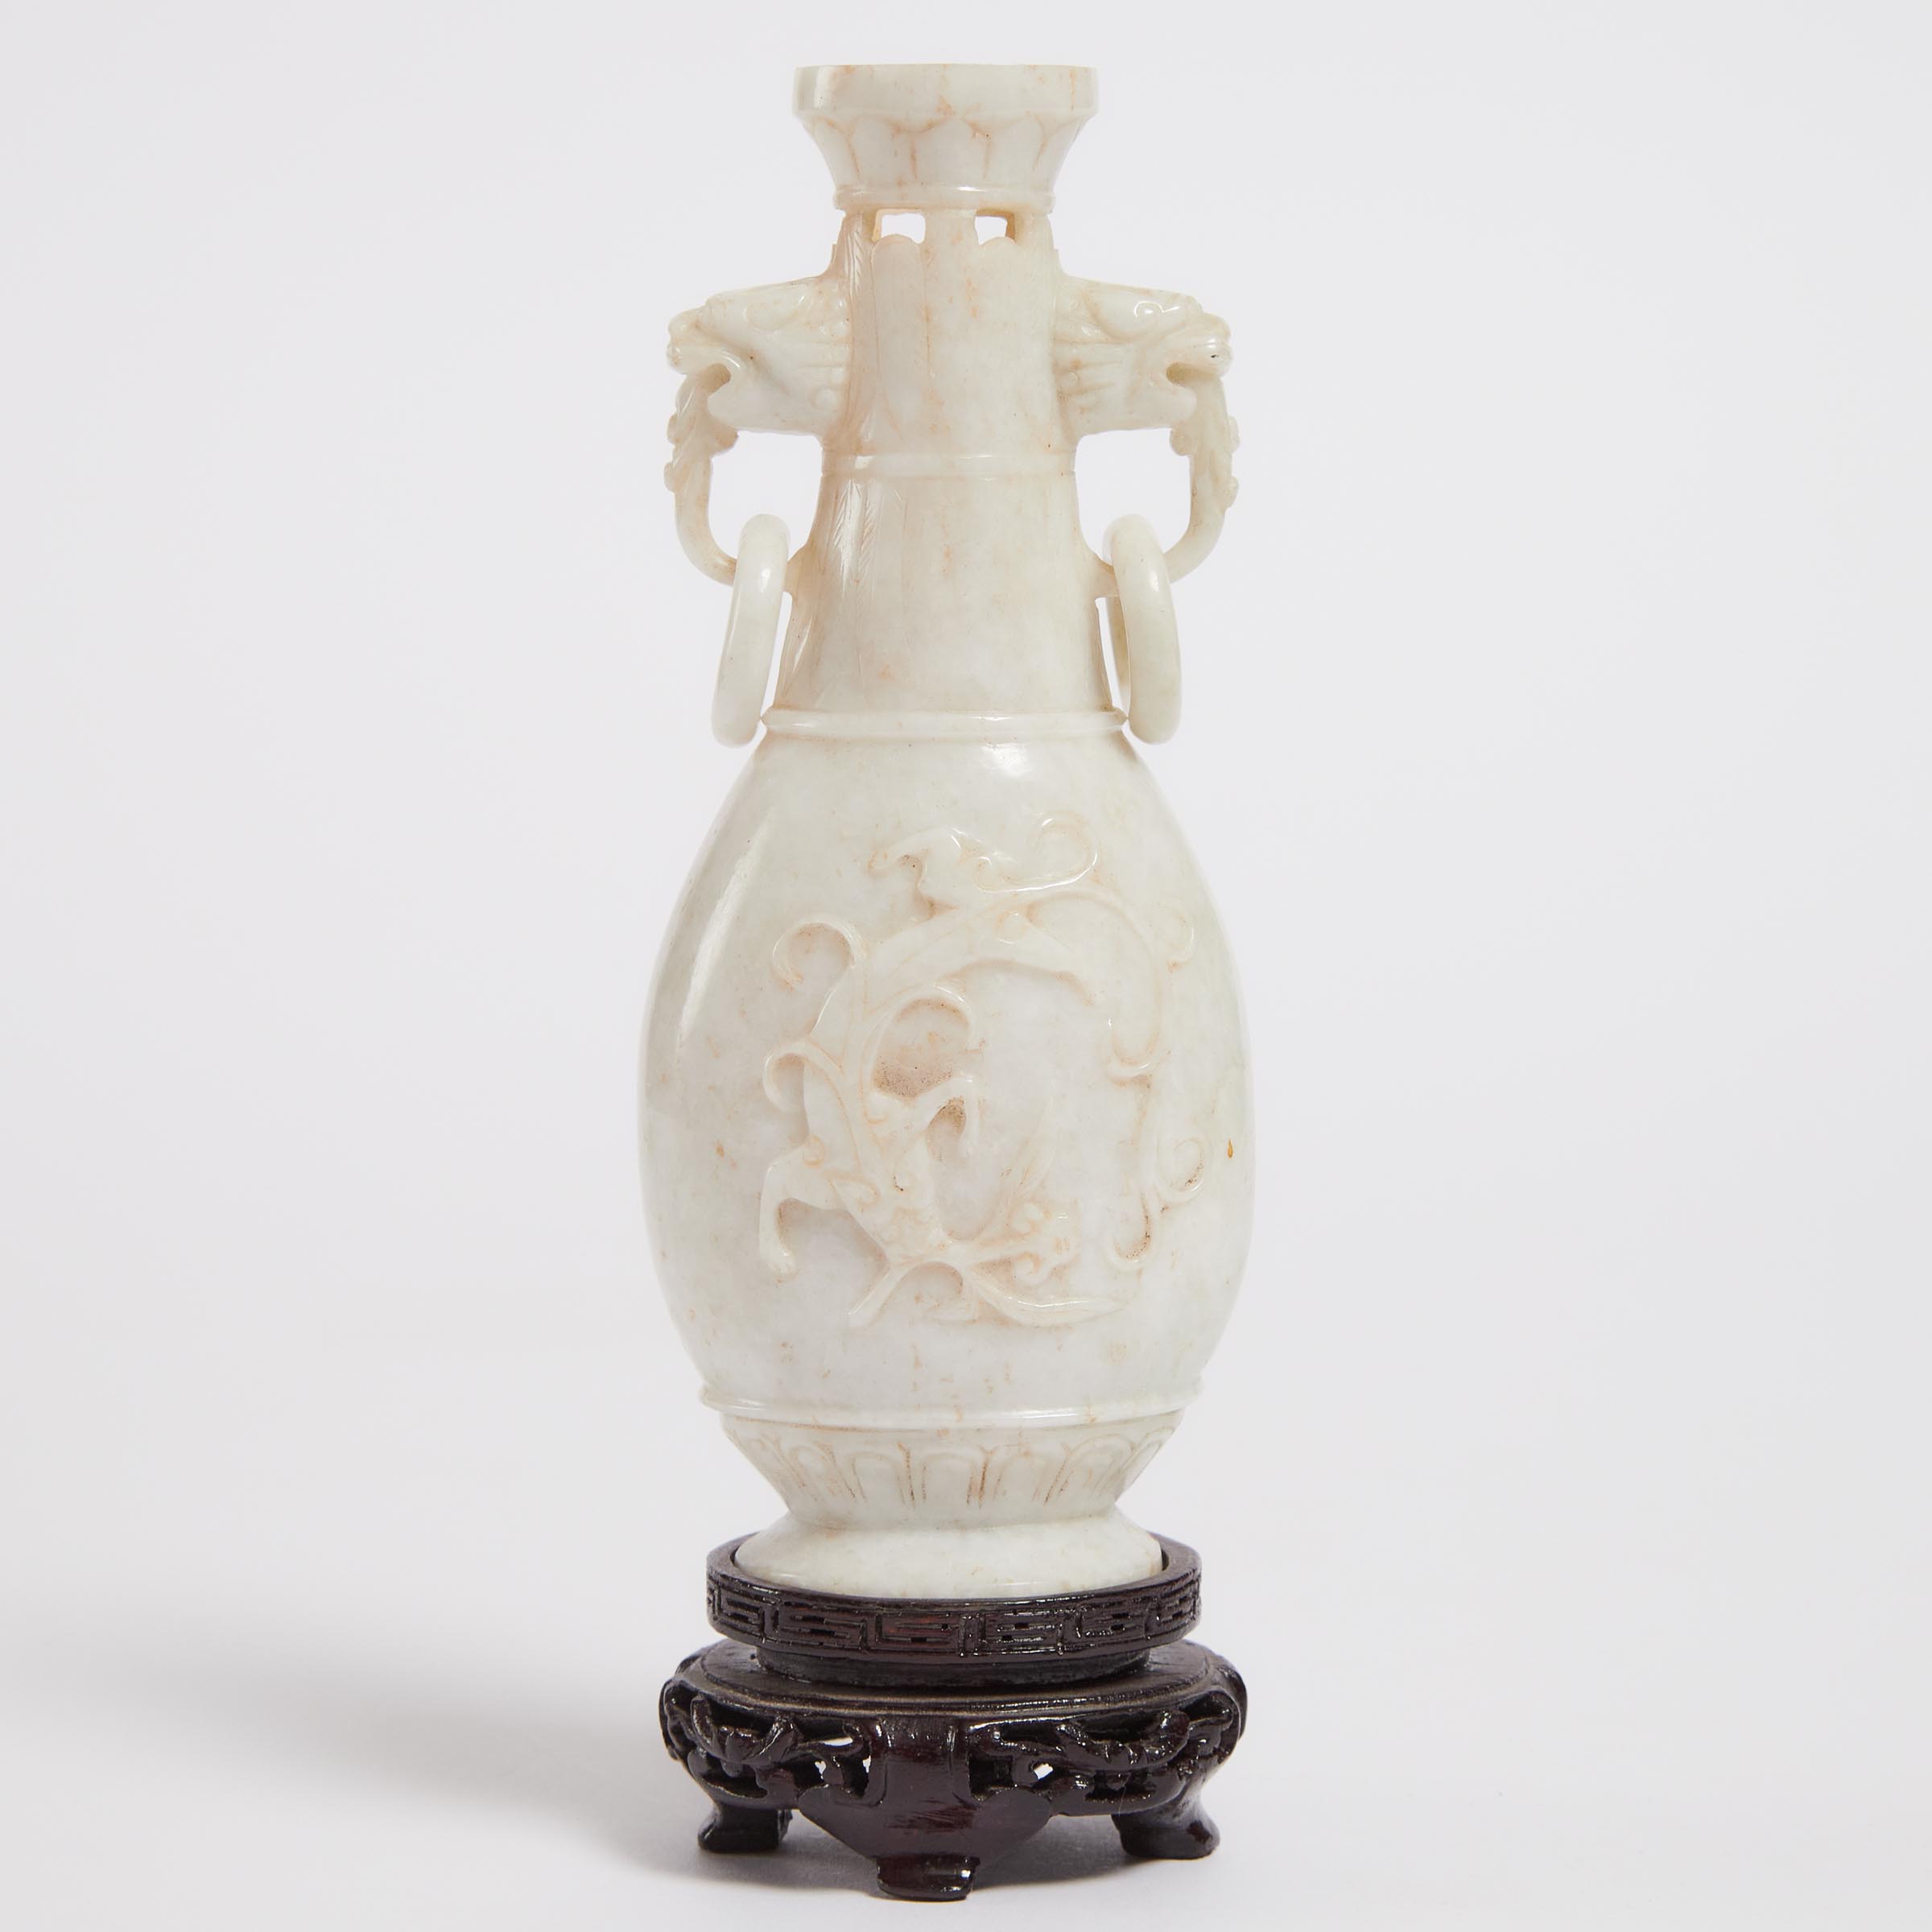 A Small Pale Hardstone Vase, 19th/20th